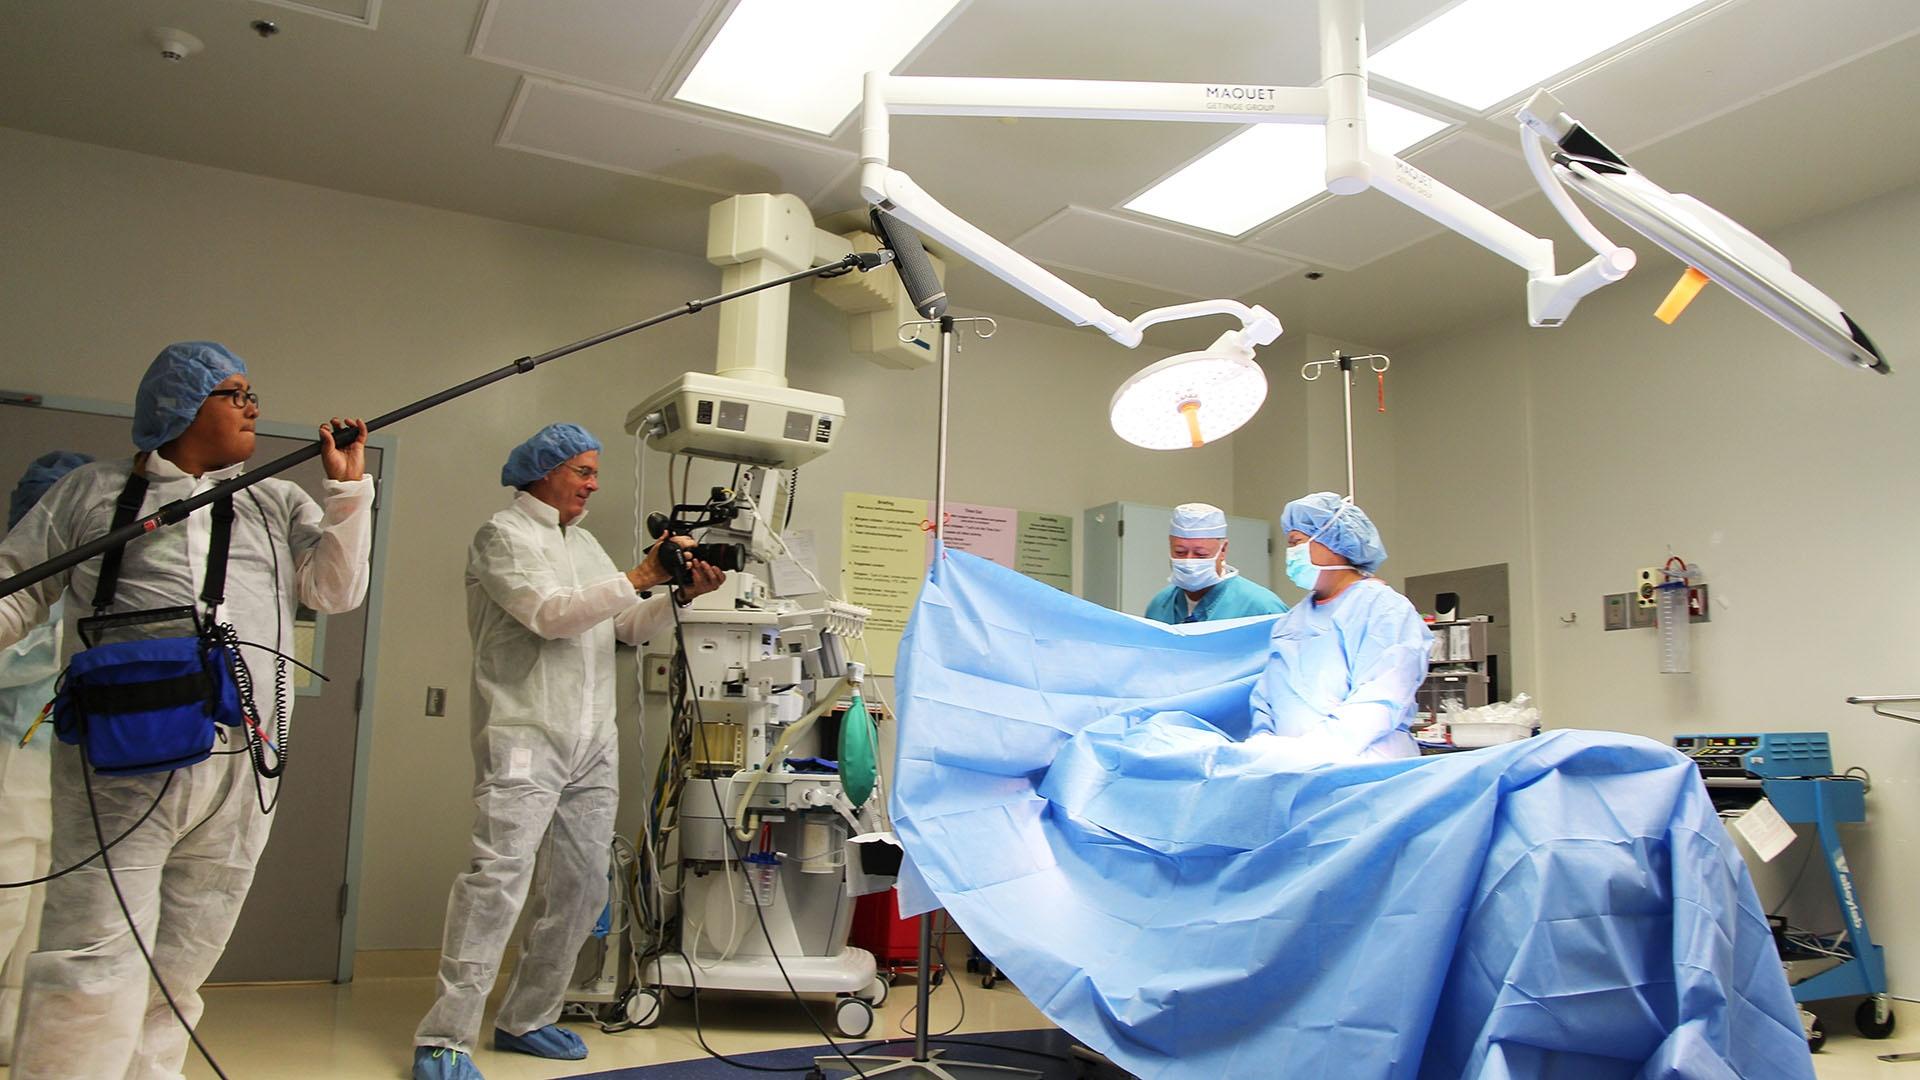 "Medicine Woman" crew filming Doctor Lori Alvord in surgery at Page Hospital in Arizona.